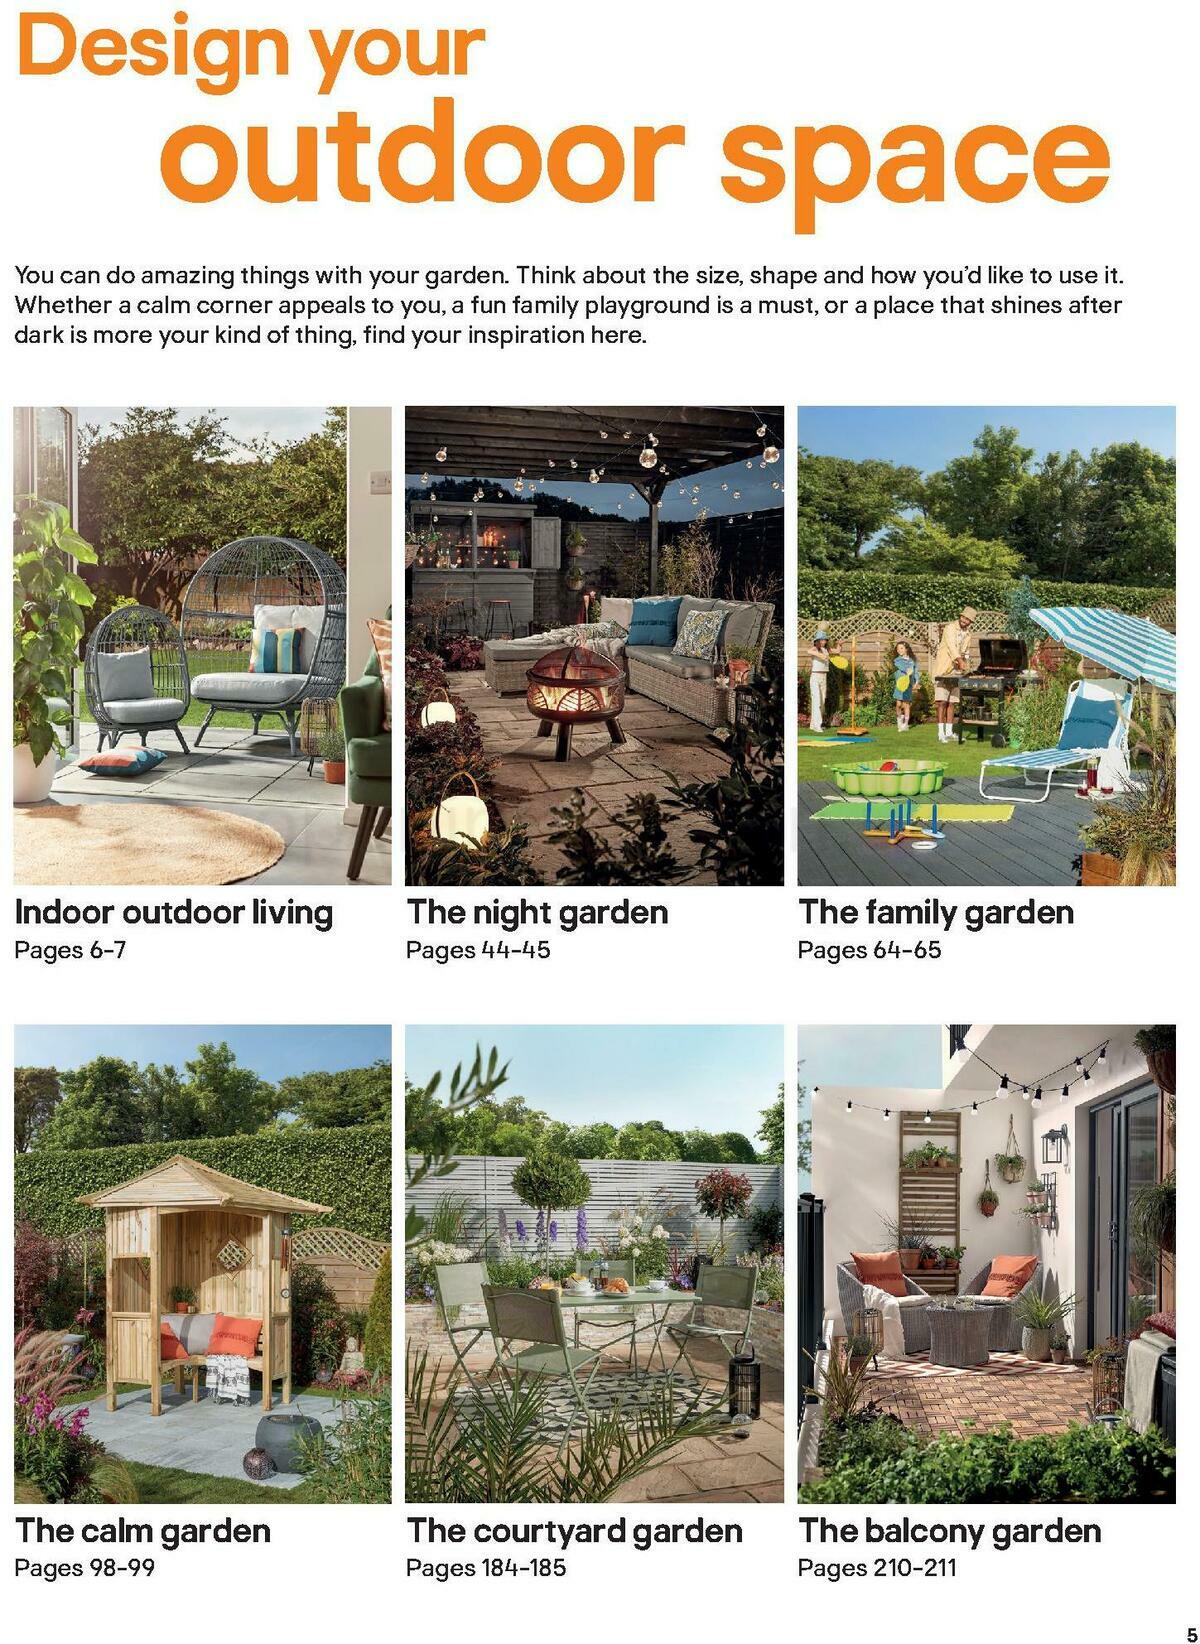 B&Q Outdoors Offers from 1 March